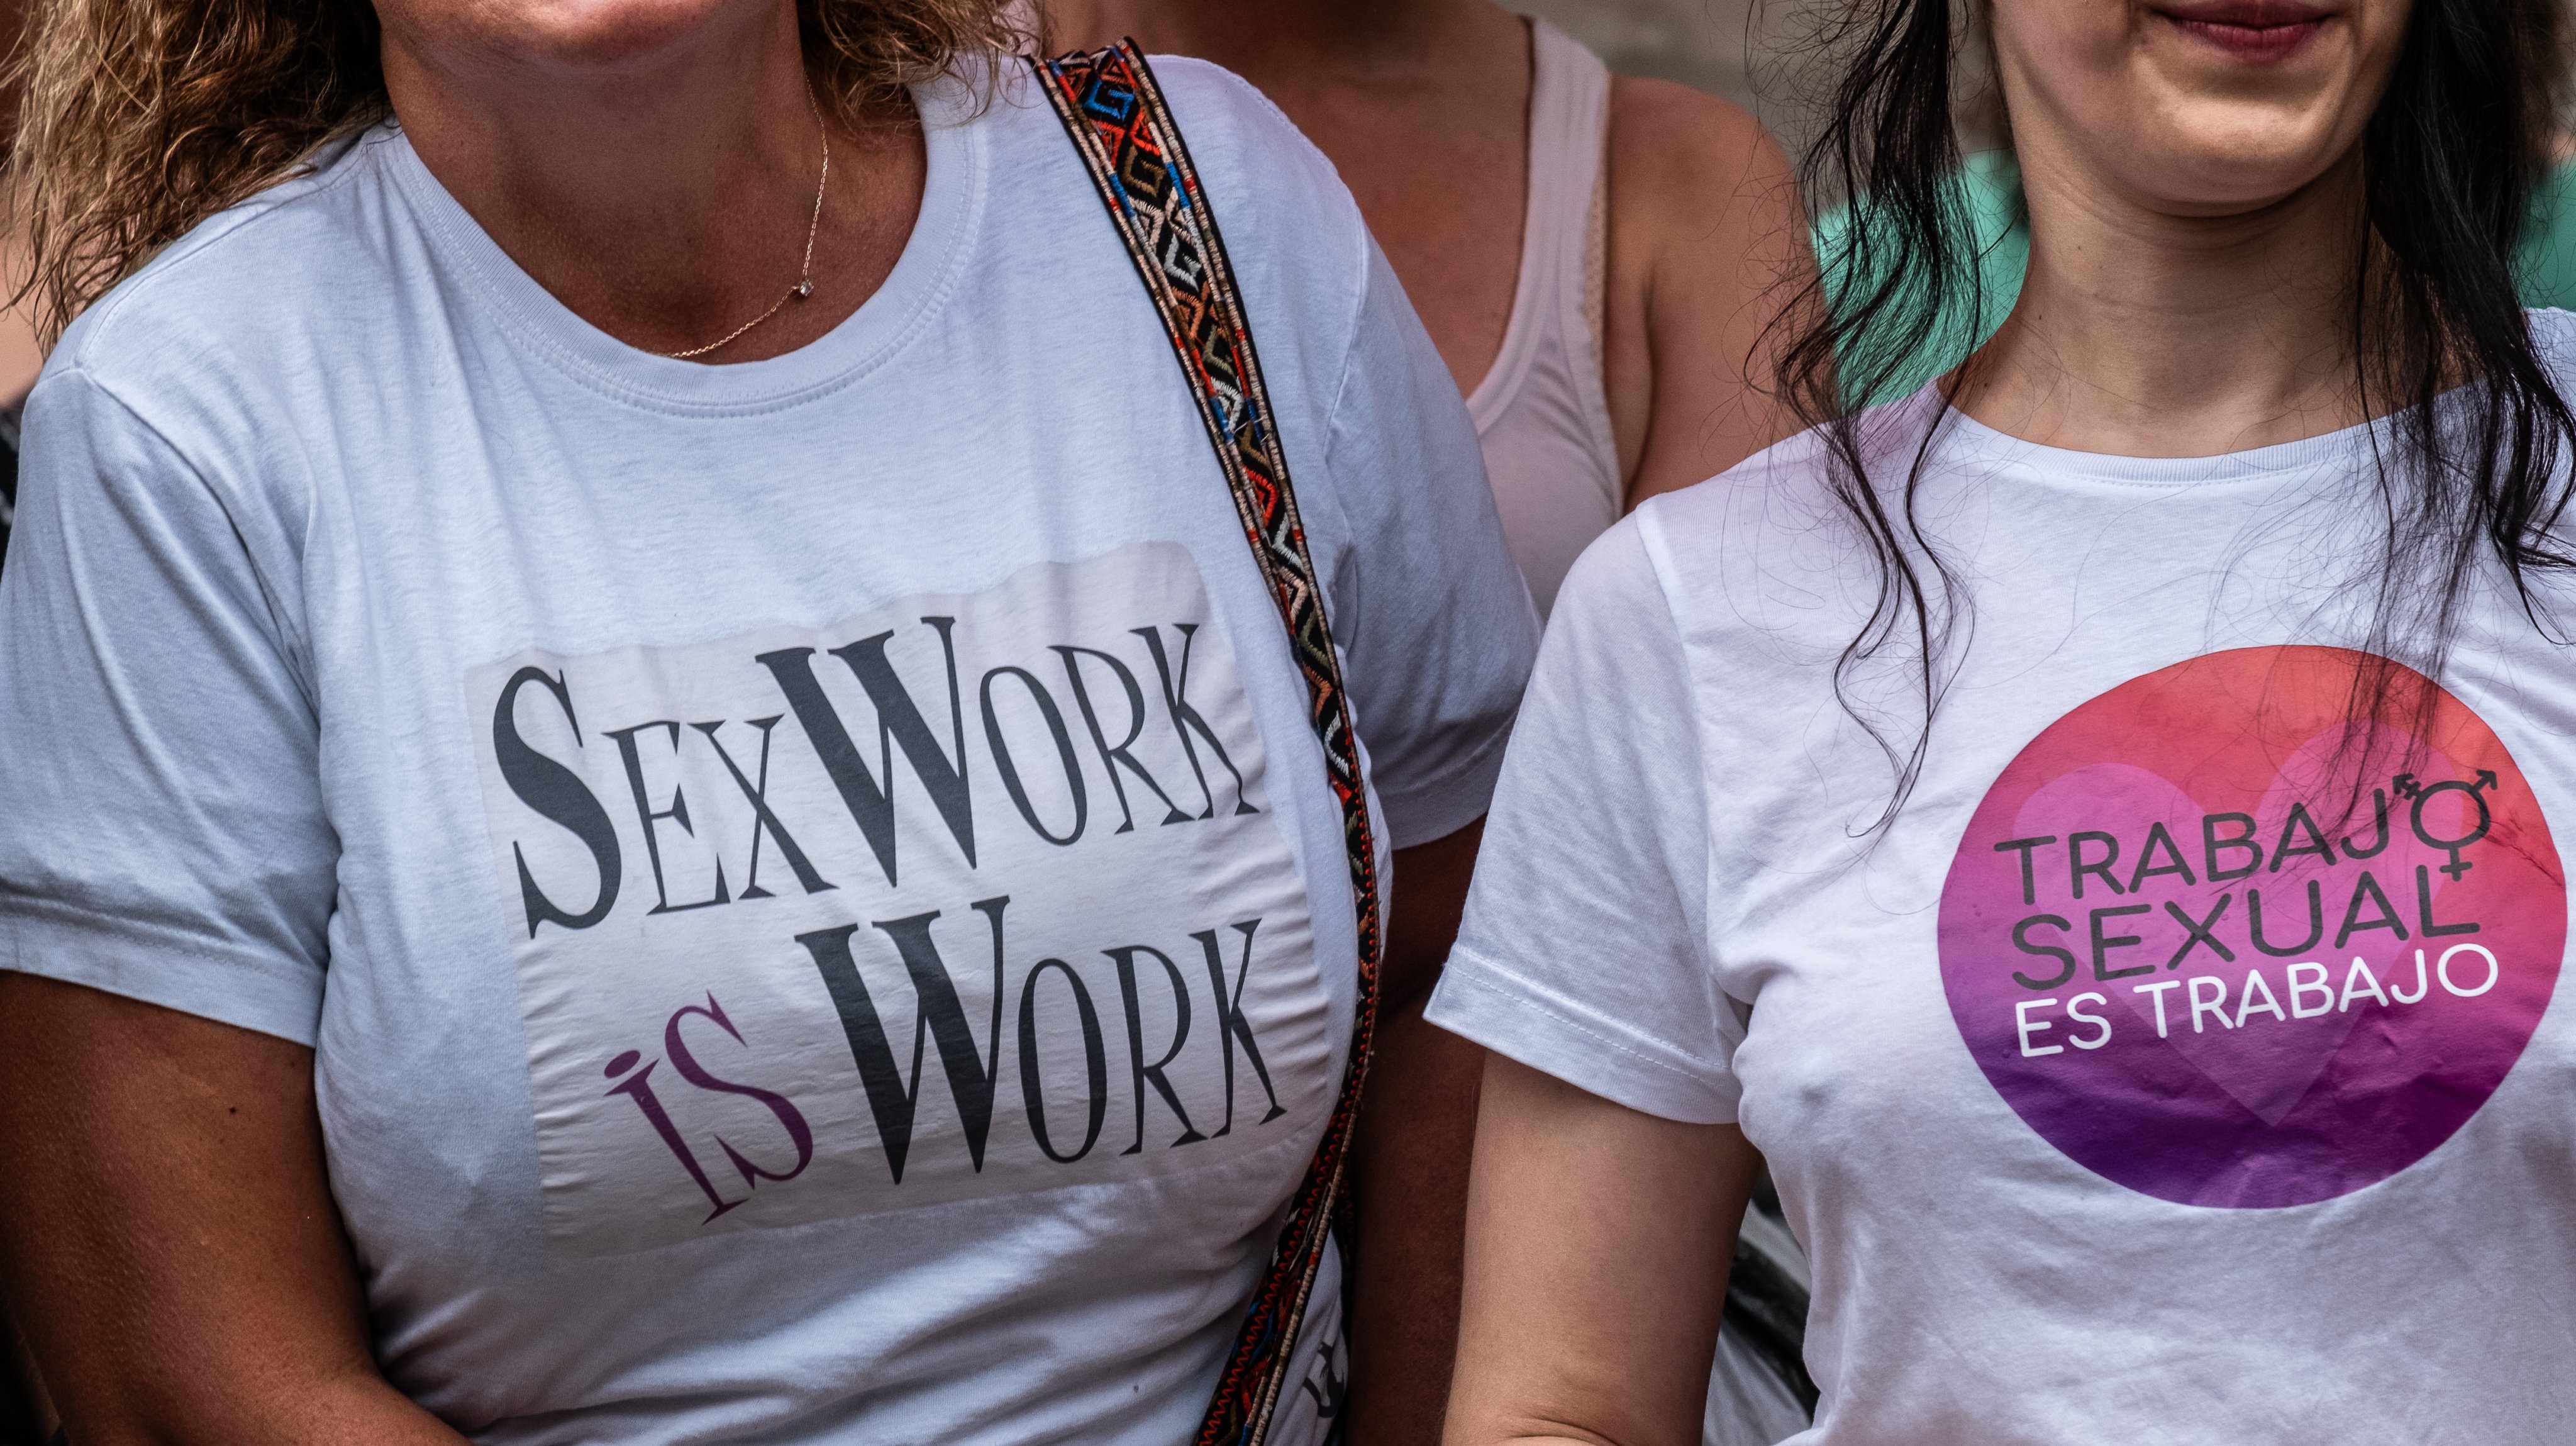 Two women wear shirts claiming the rights of sex workers.